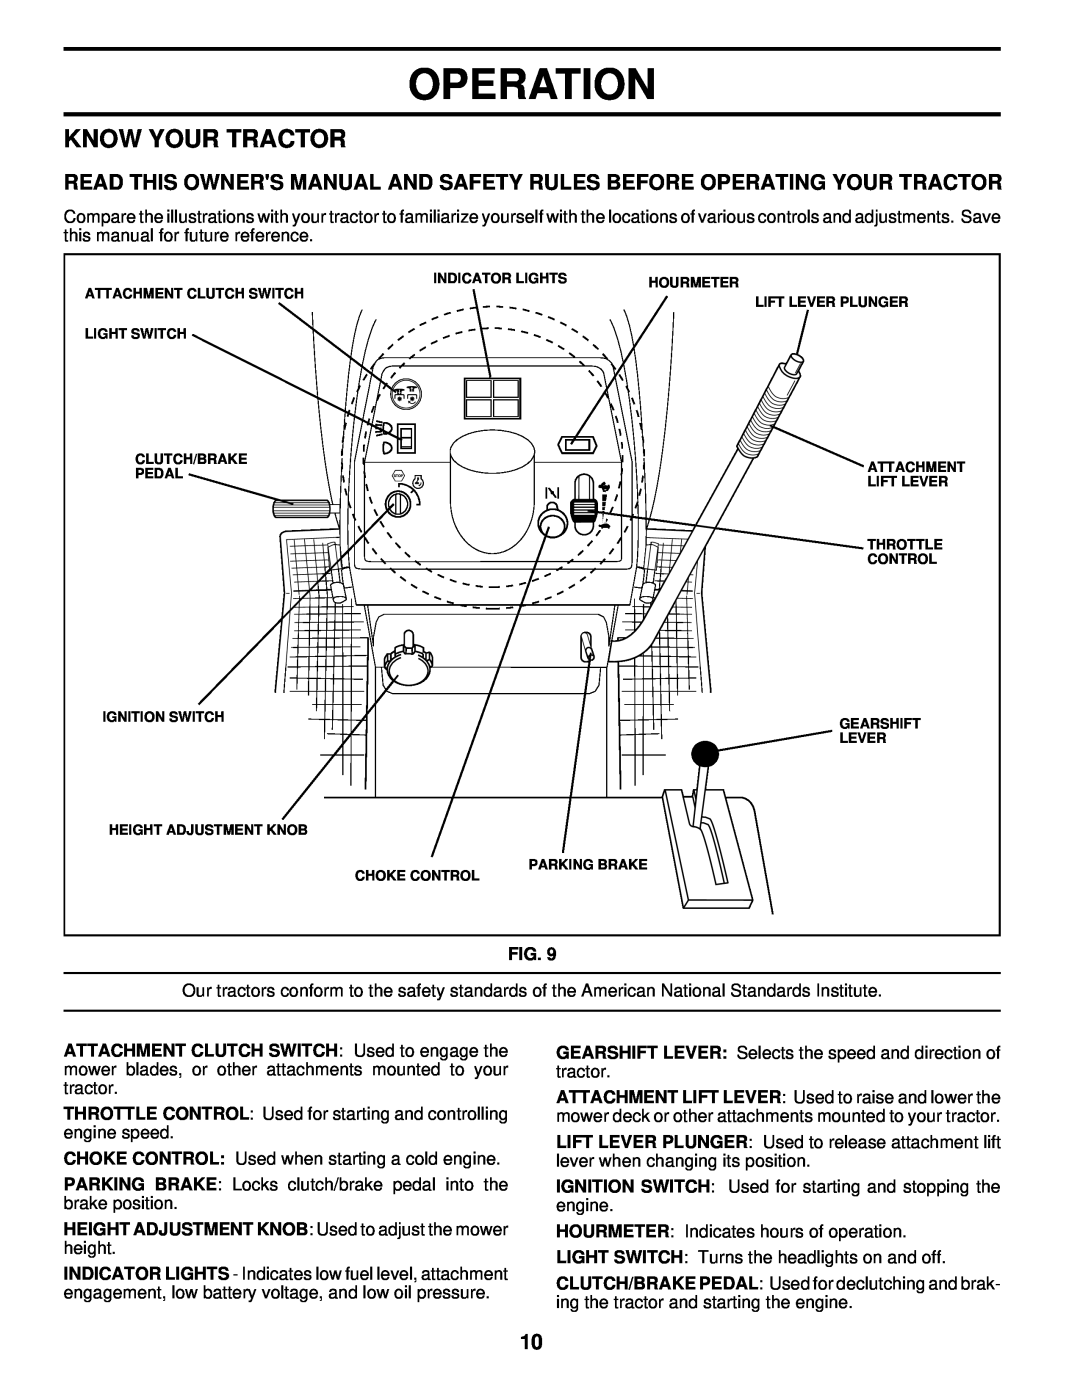 Husqvarna YT180 owner manual Operation, Know Your Tractor 